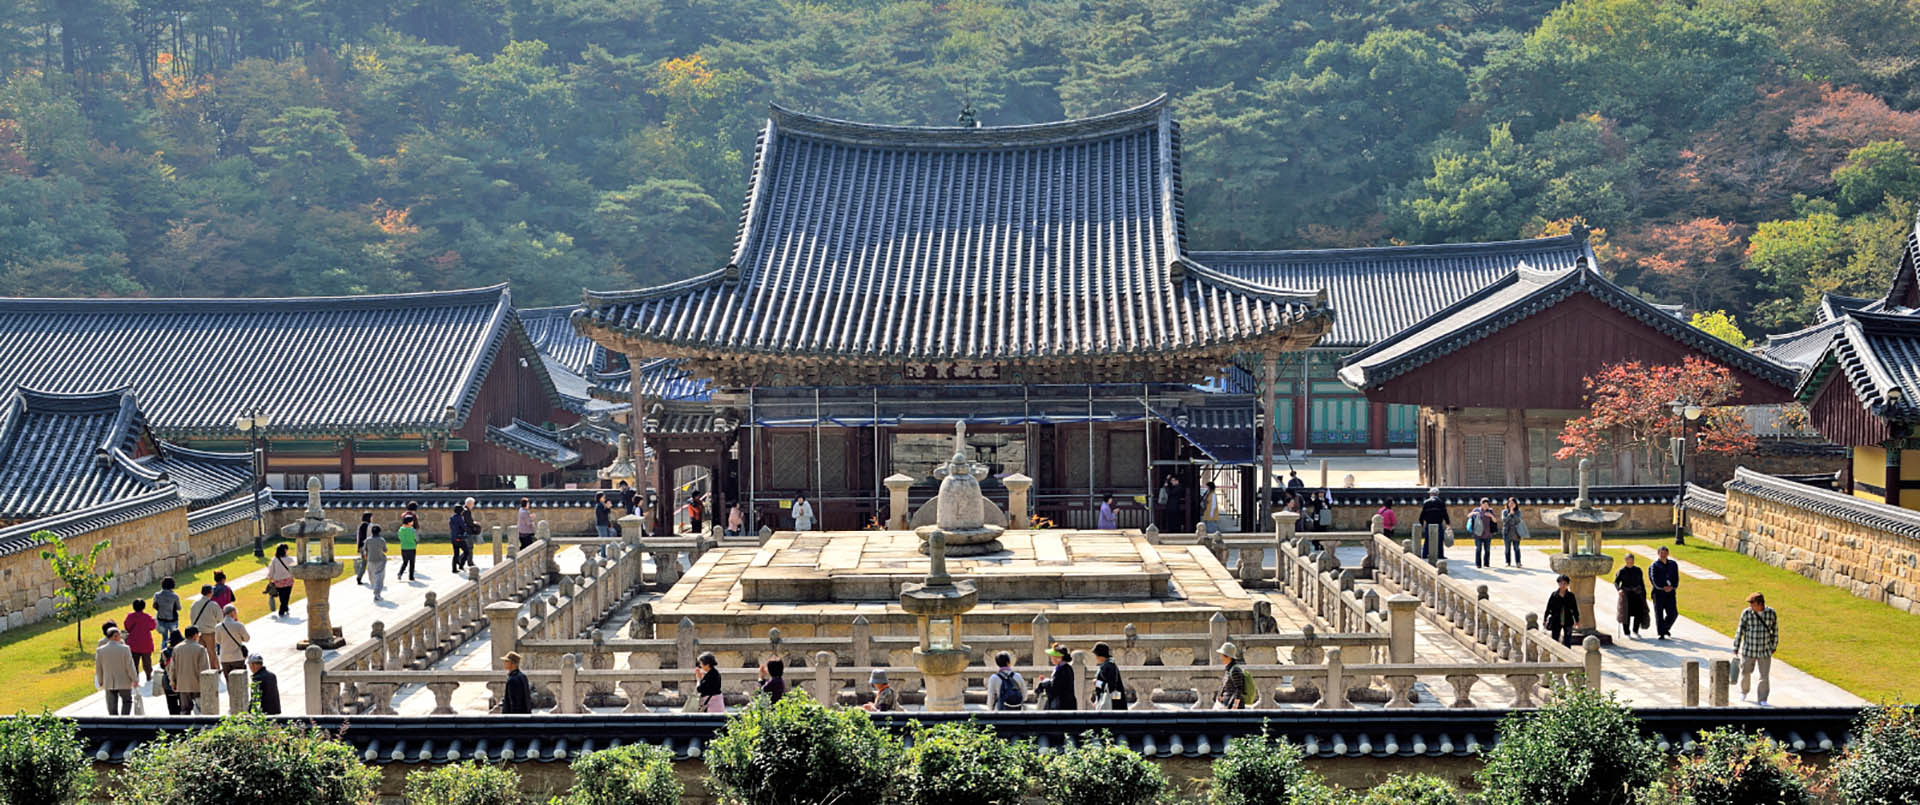 Seven Korean Buddhist temples added to World Heritage list